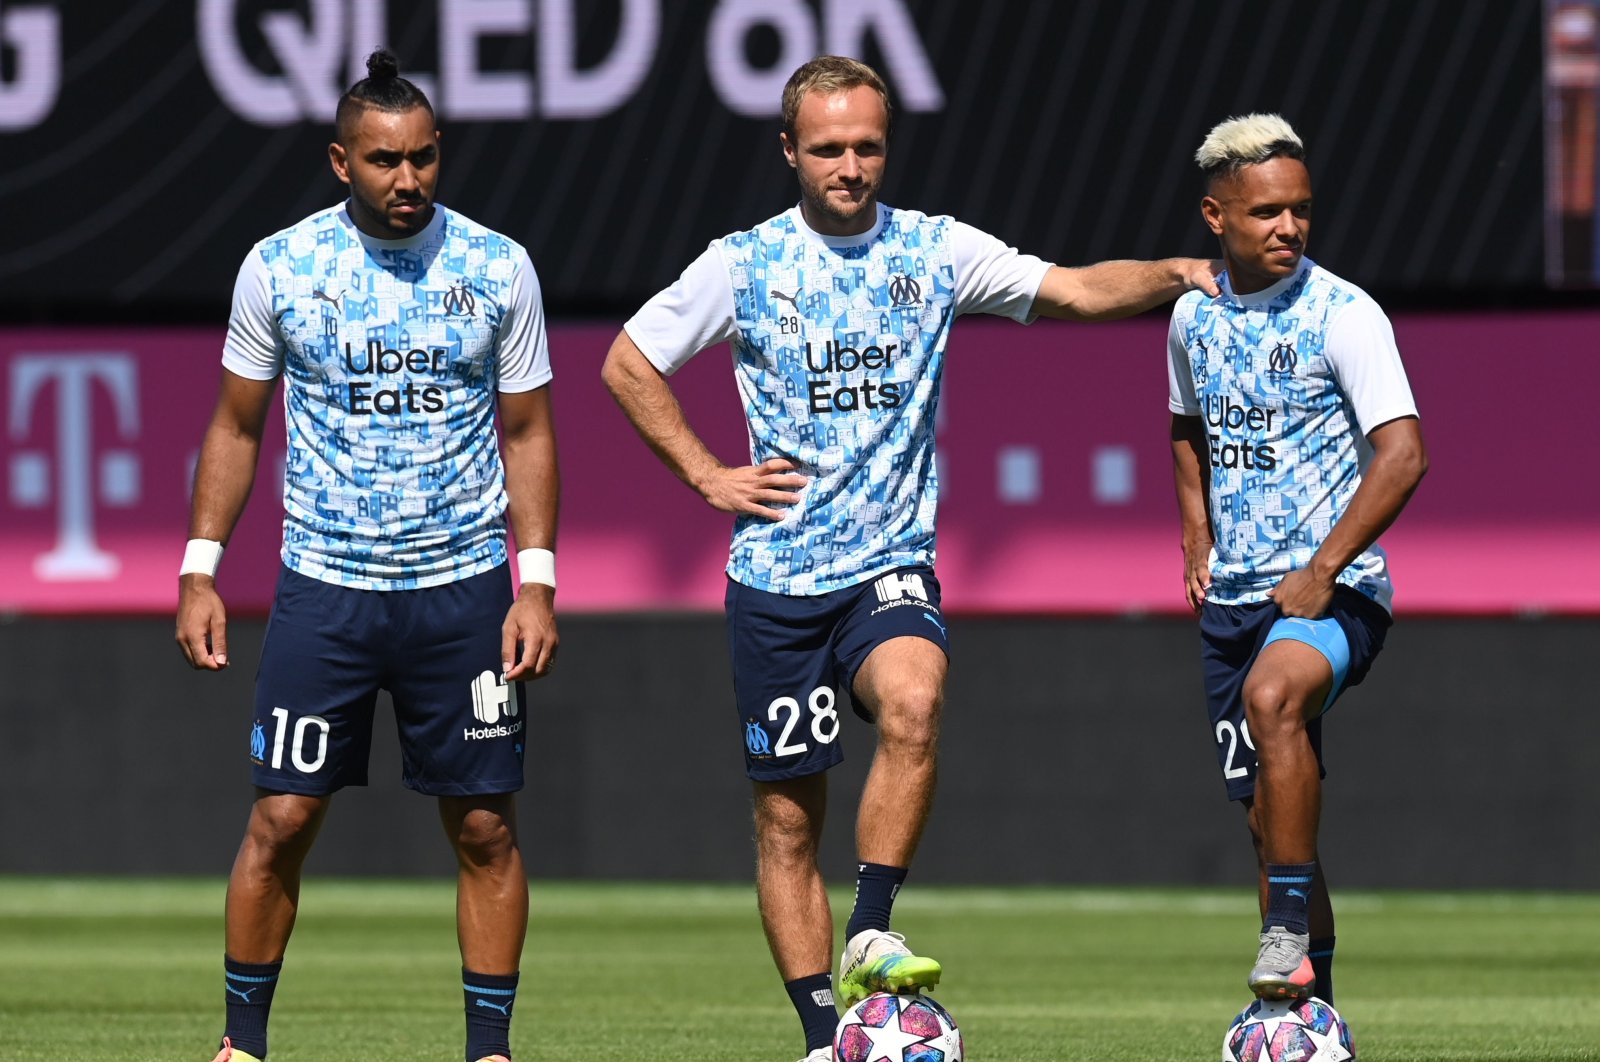 Marseille's Dimitri Payet (L), Valere Germain (C) and Florian Chabrolle (R) stand on the pitch before a match, in Munich, Germany, July 31, 2020. (AFP Photo)